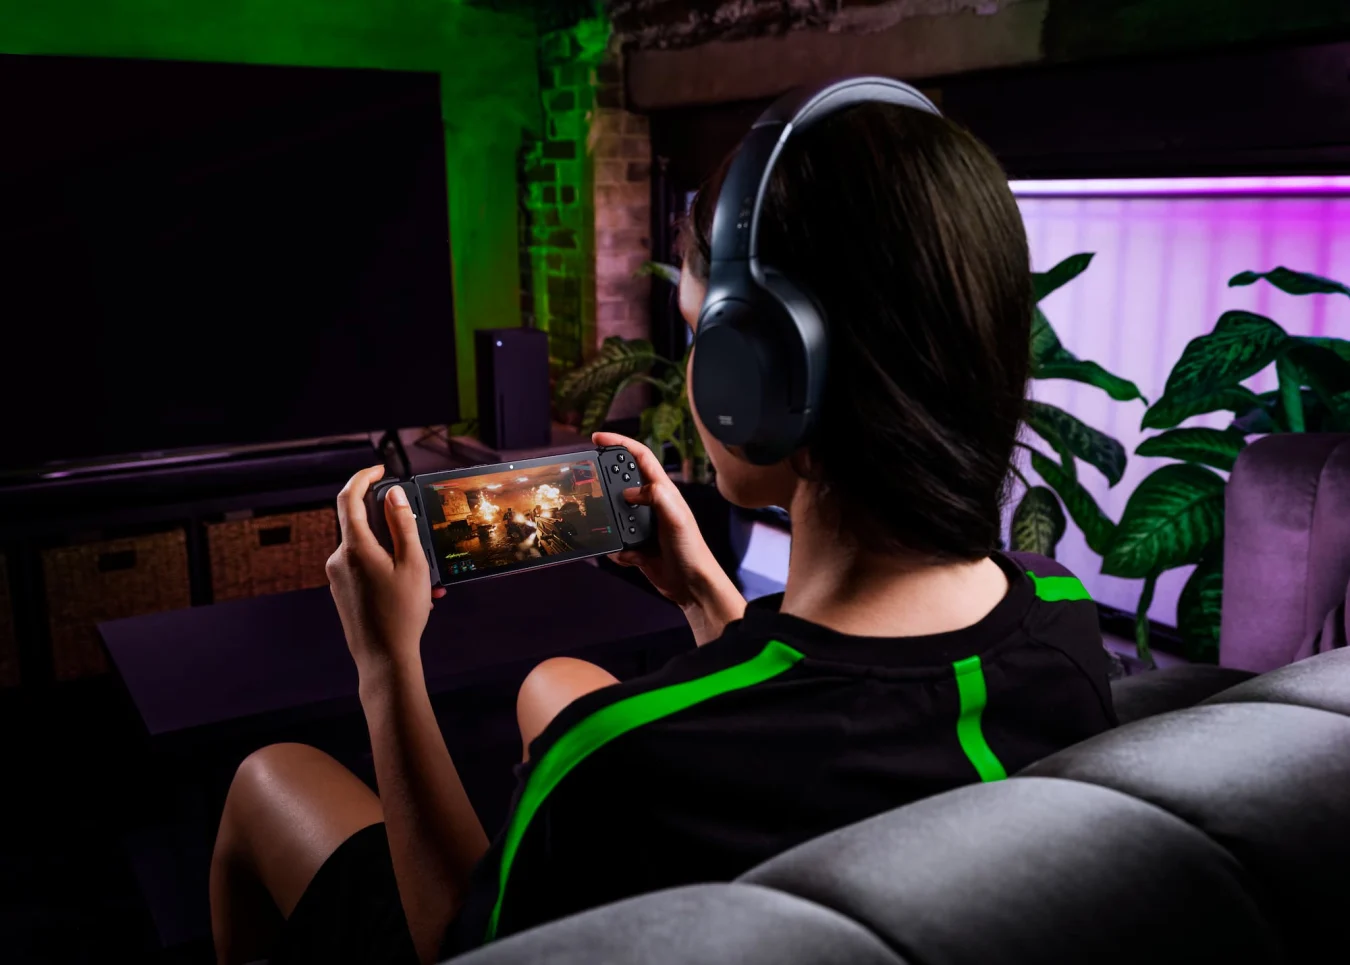 A person wearing headphones sitting on a couch while holding a Razer Edge portable gaming device.